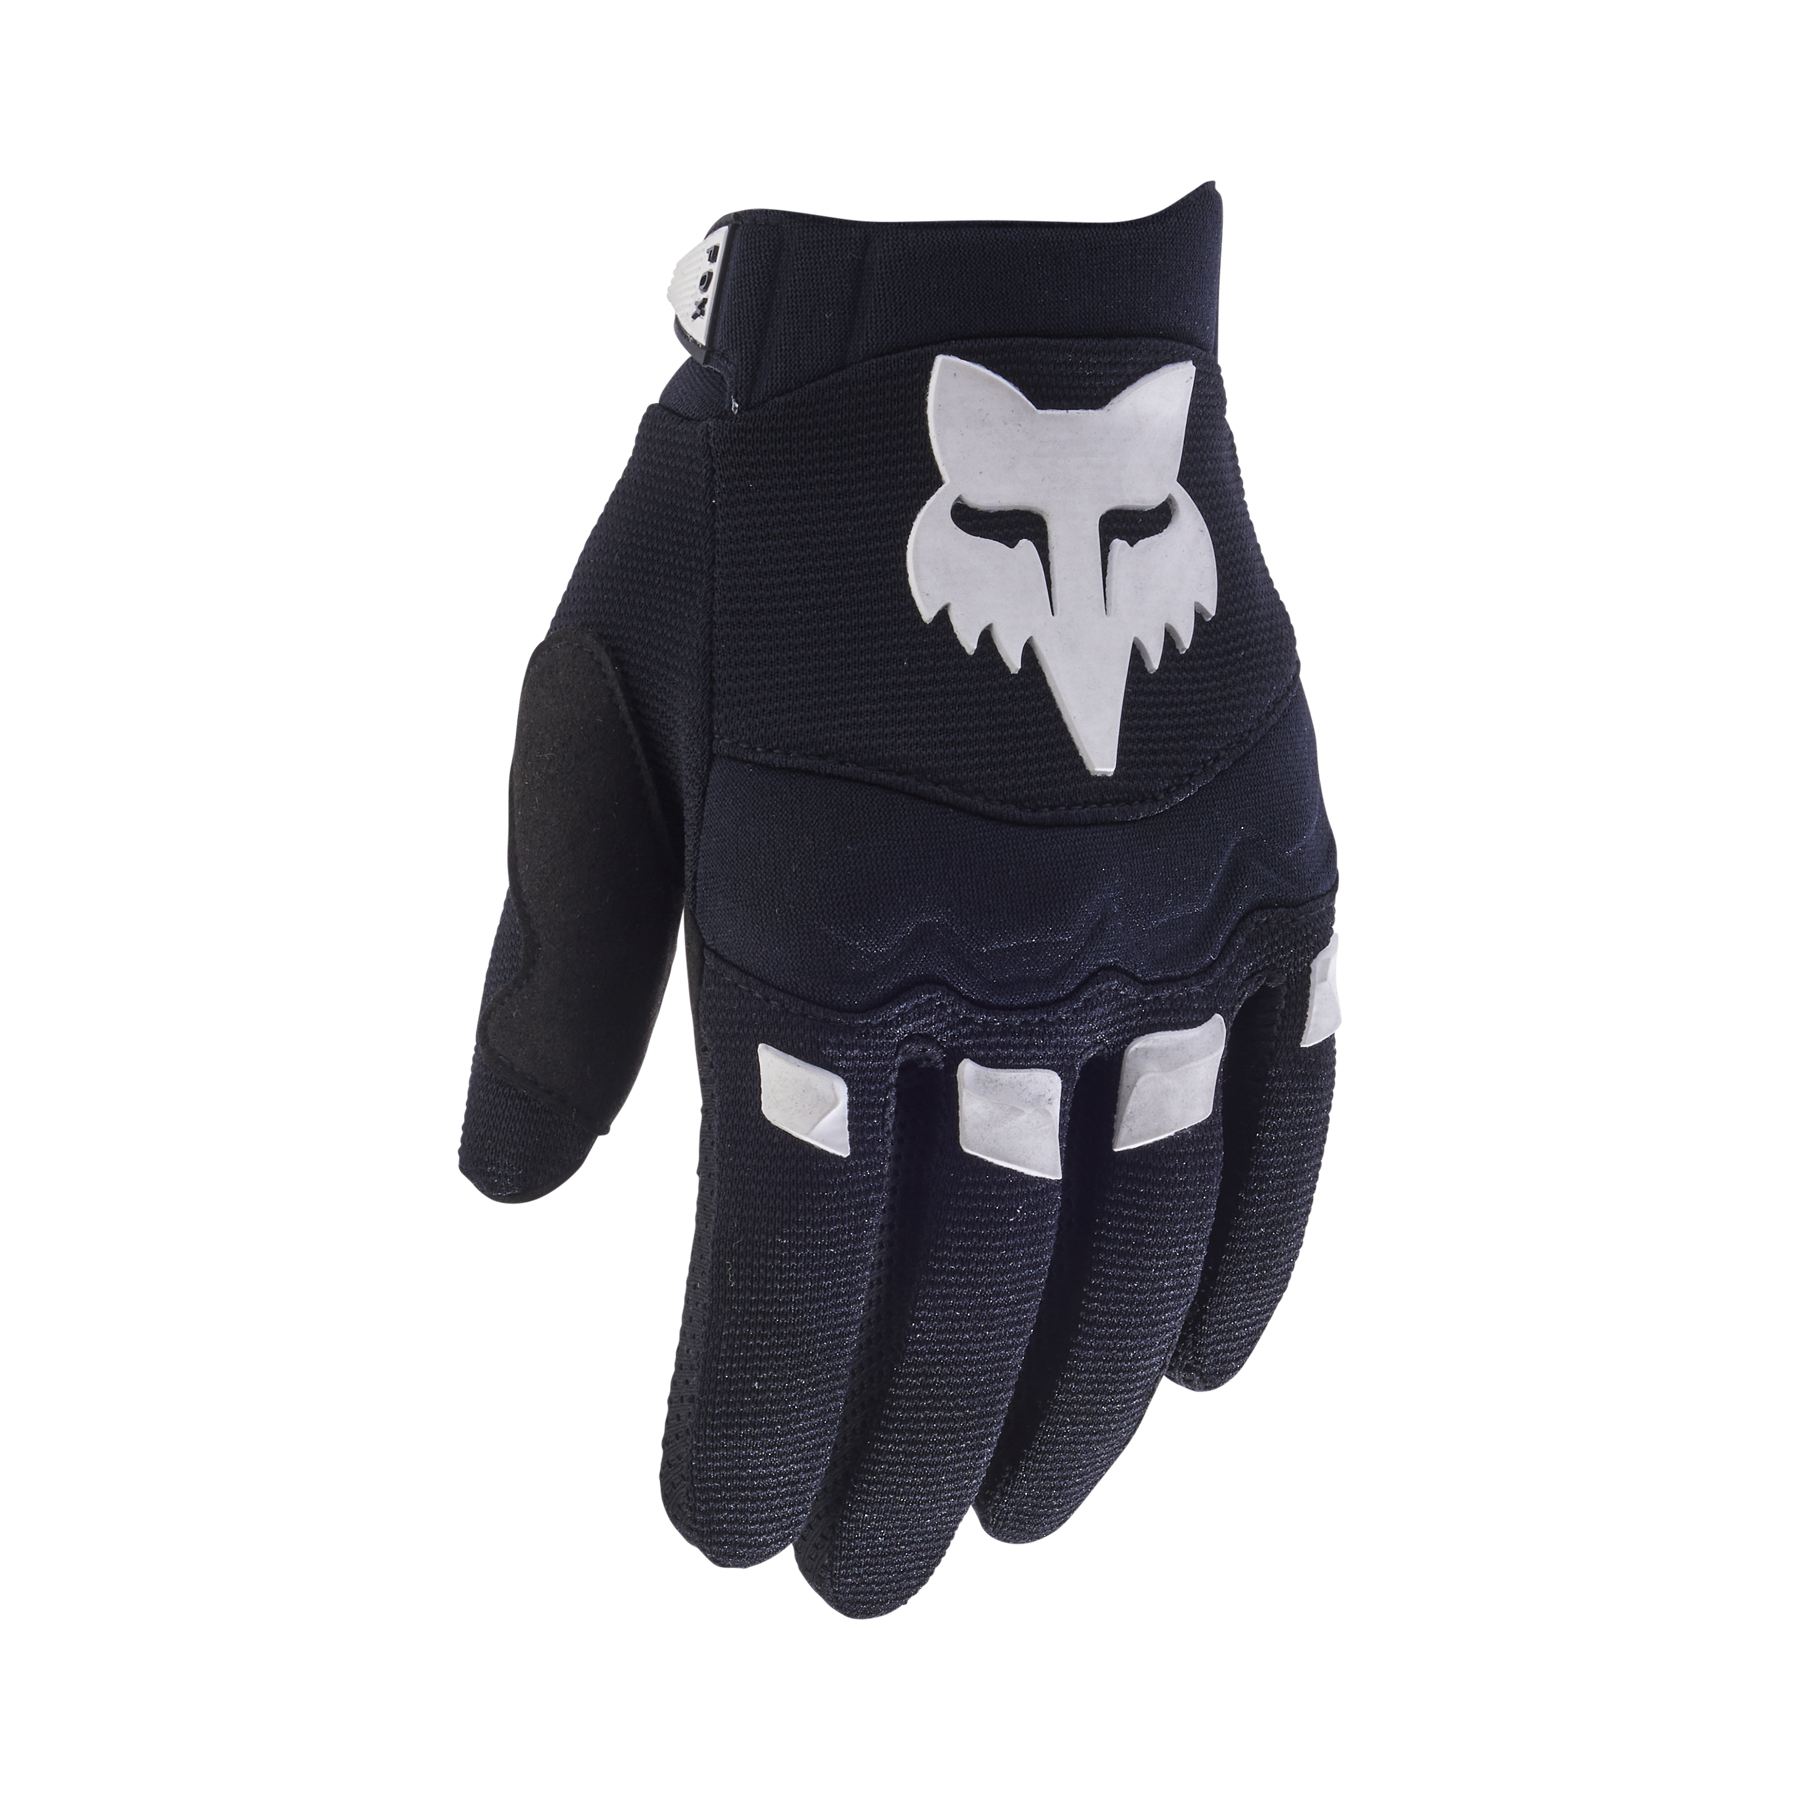 Fox Dirtpaw Youth Gloves - Youth L - Black - Image 1